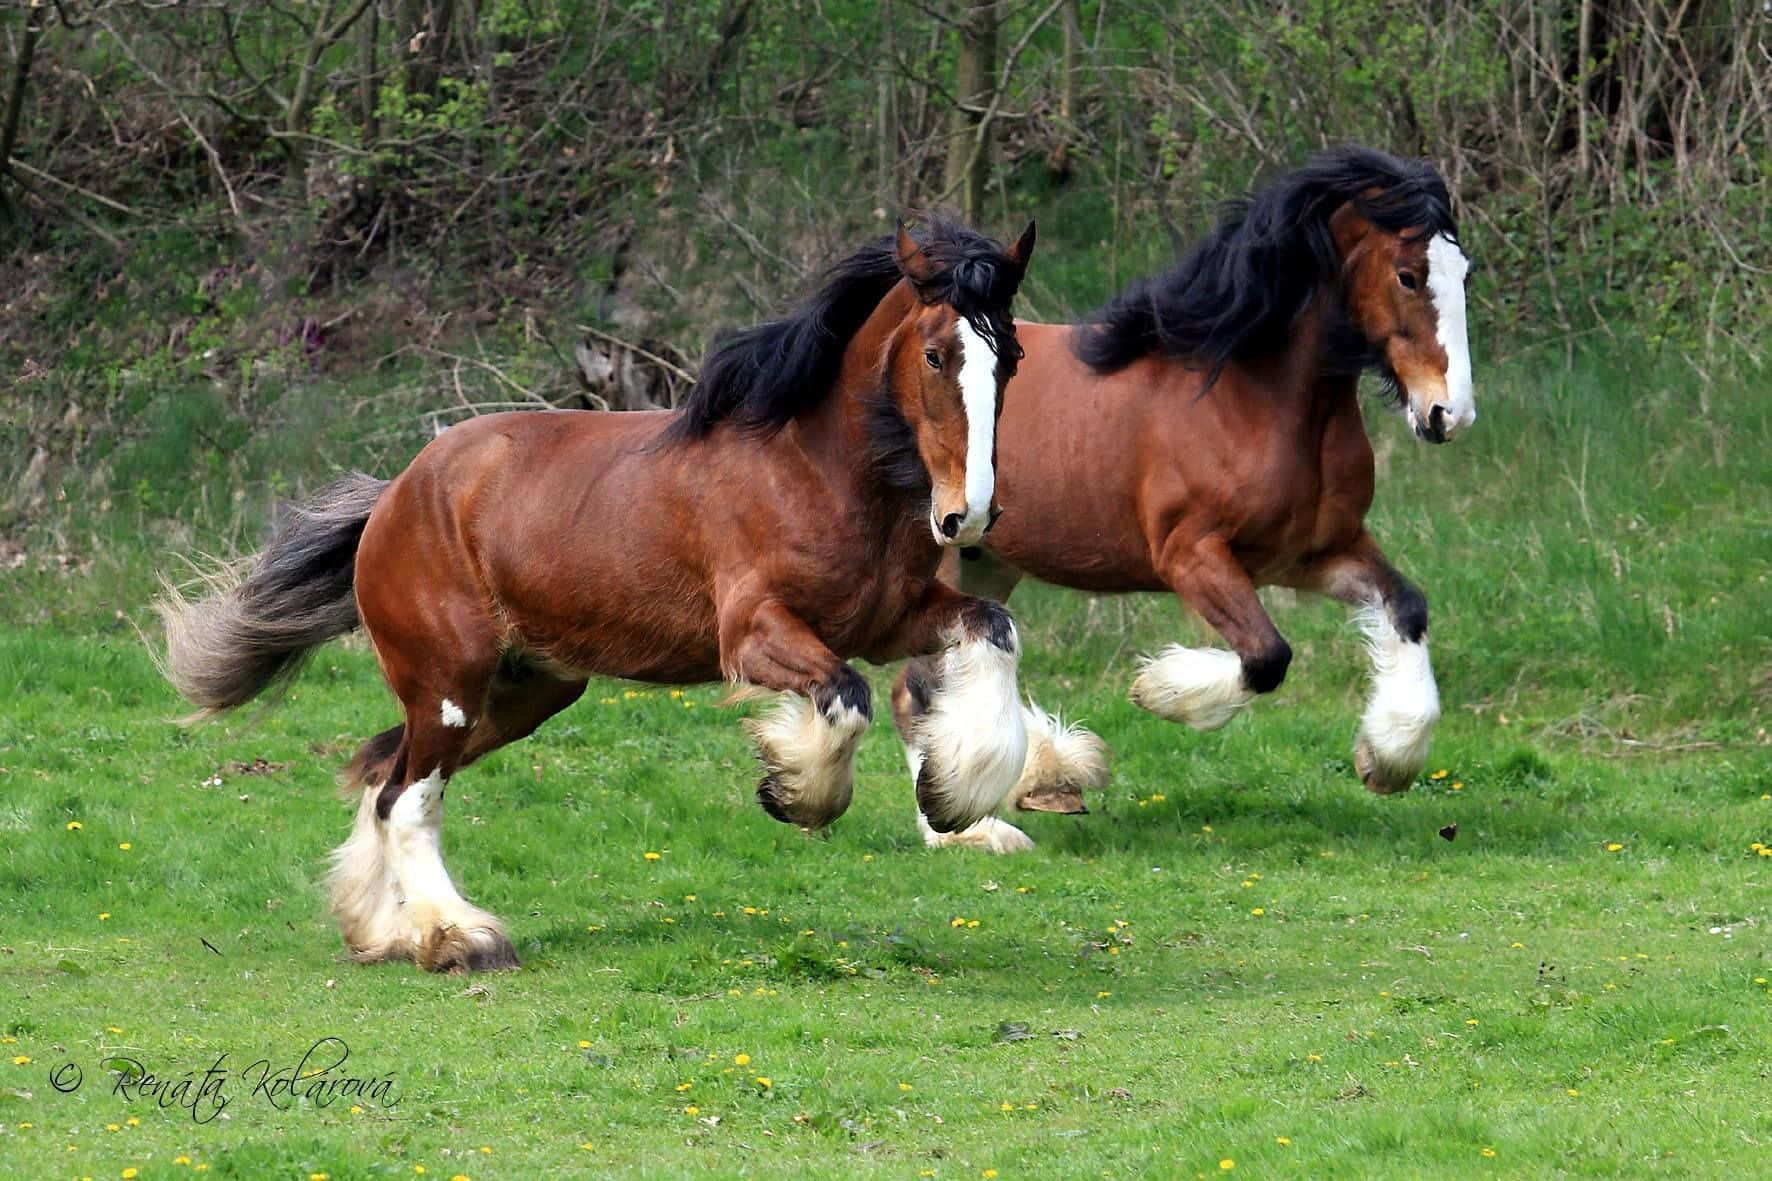 "A brown Clydesdale Horse striking a proud pose in classical equestrian style"